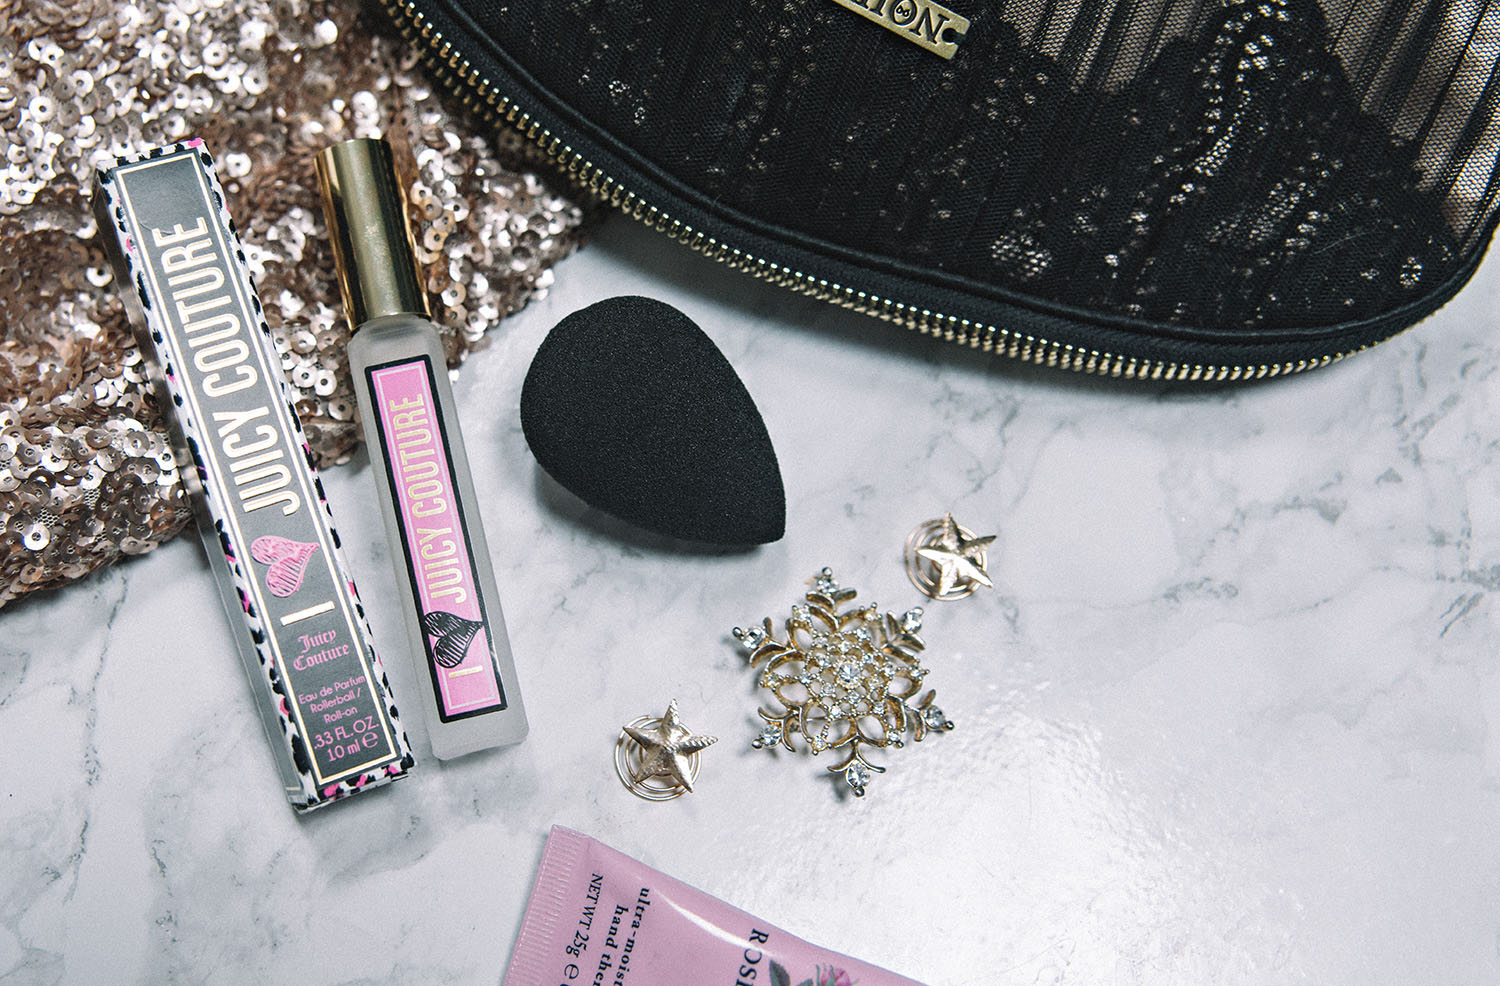 Juicy Couture I love Juicy Couture EdP Rollerball